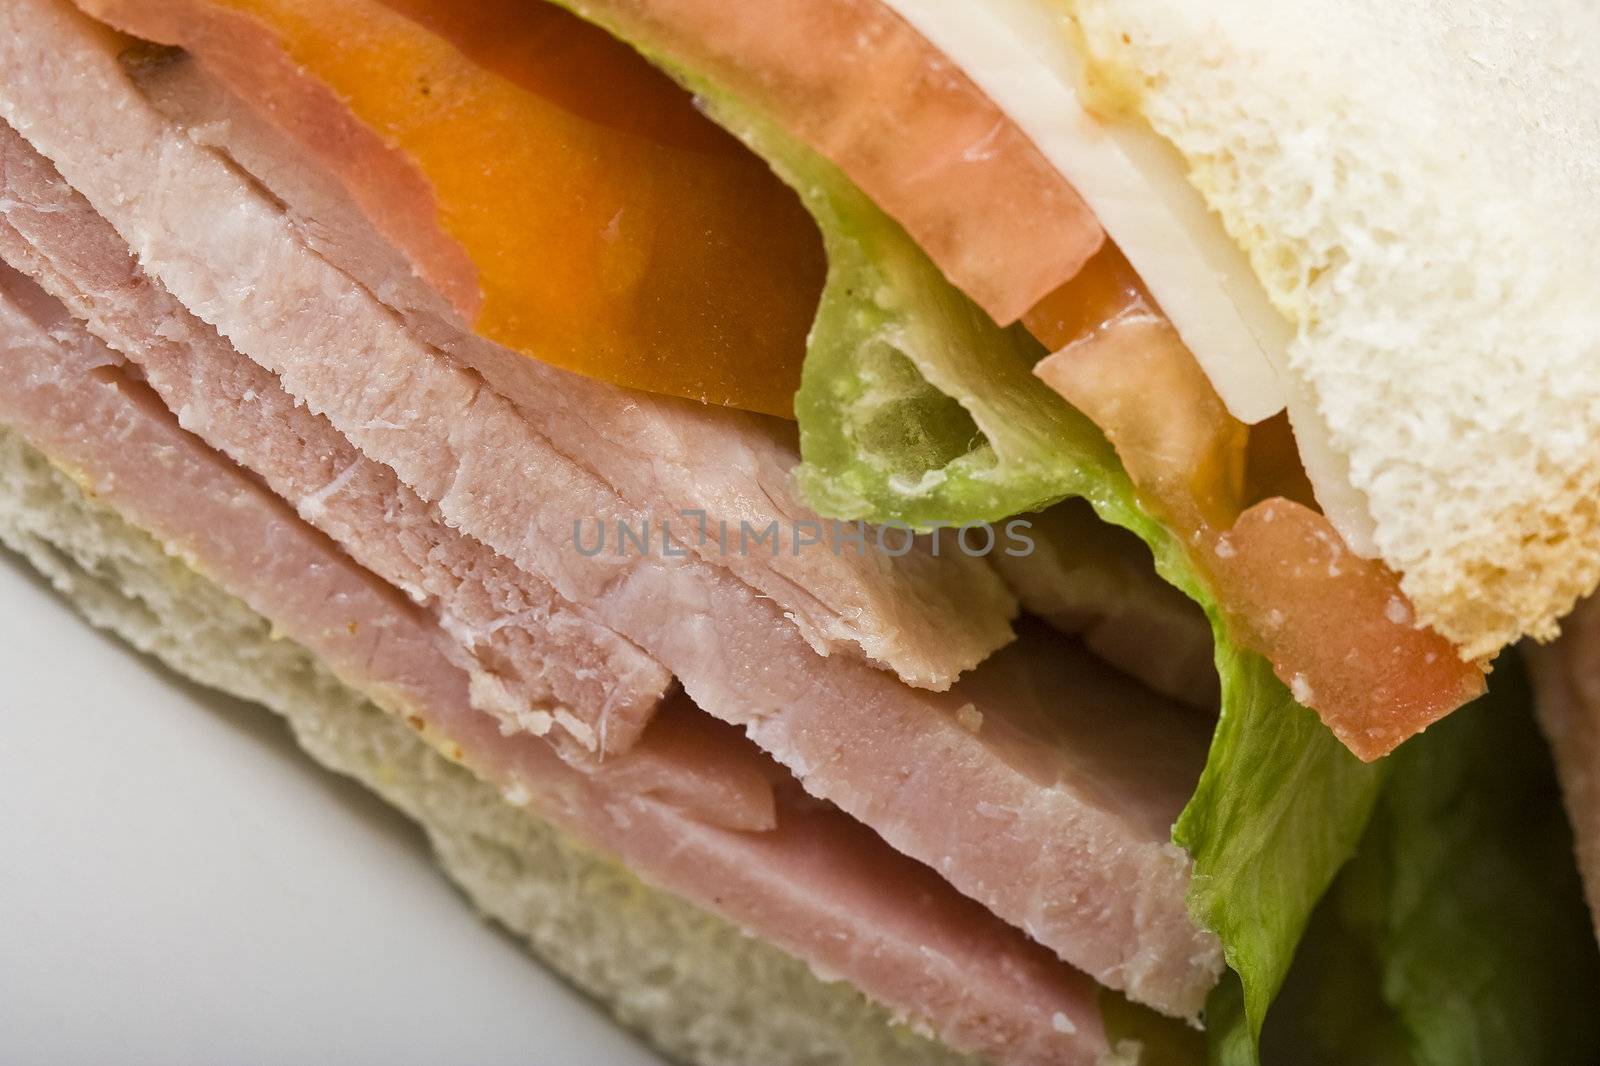 close up of a  ham and cheese sandwich